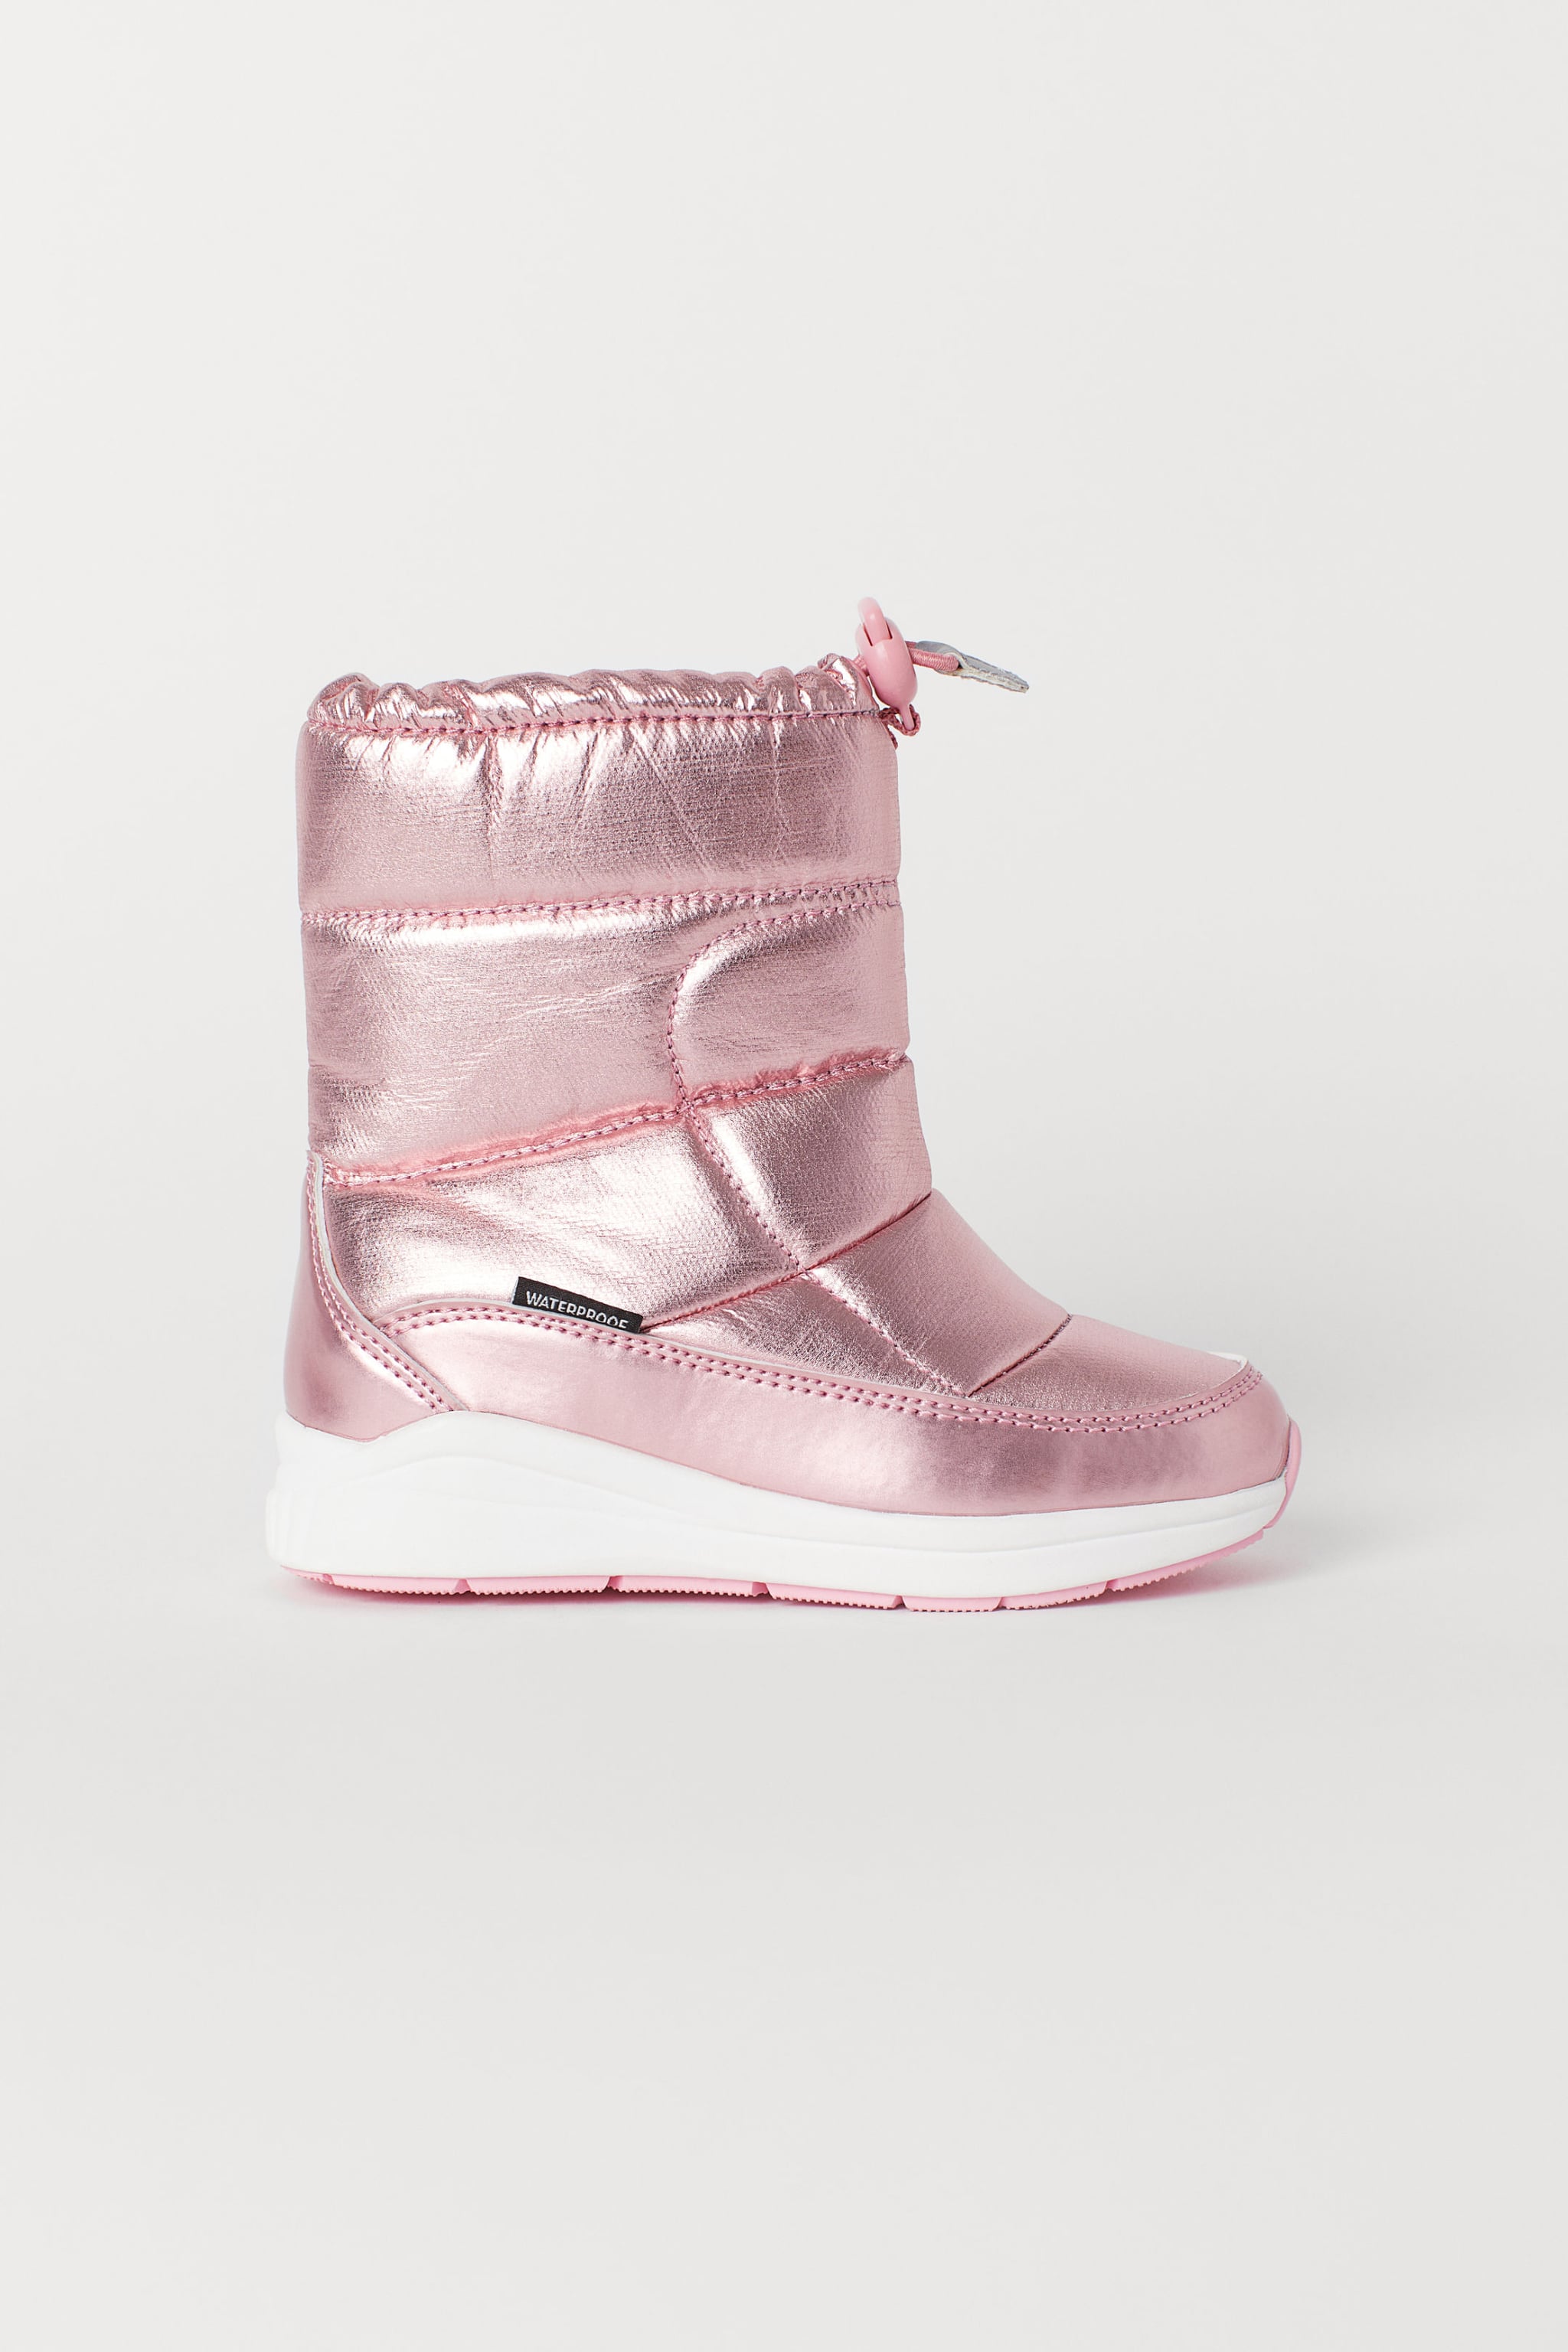 h&m moon boots